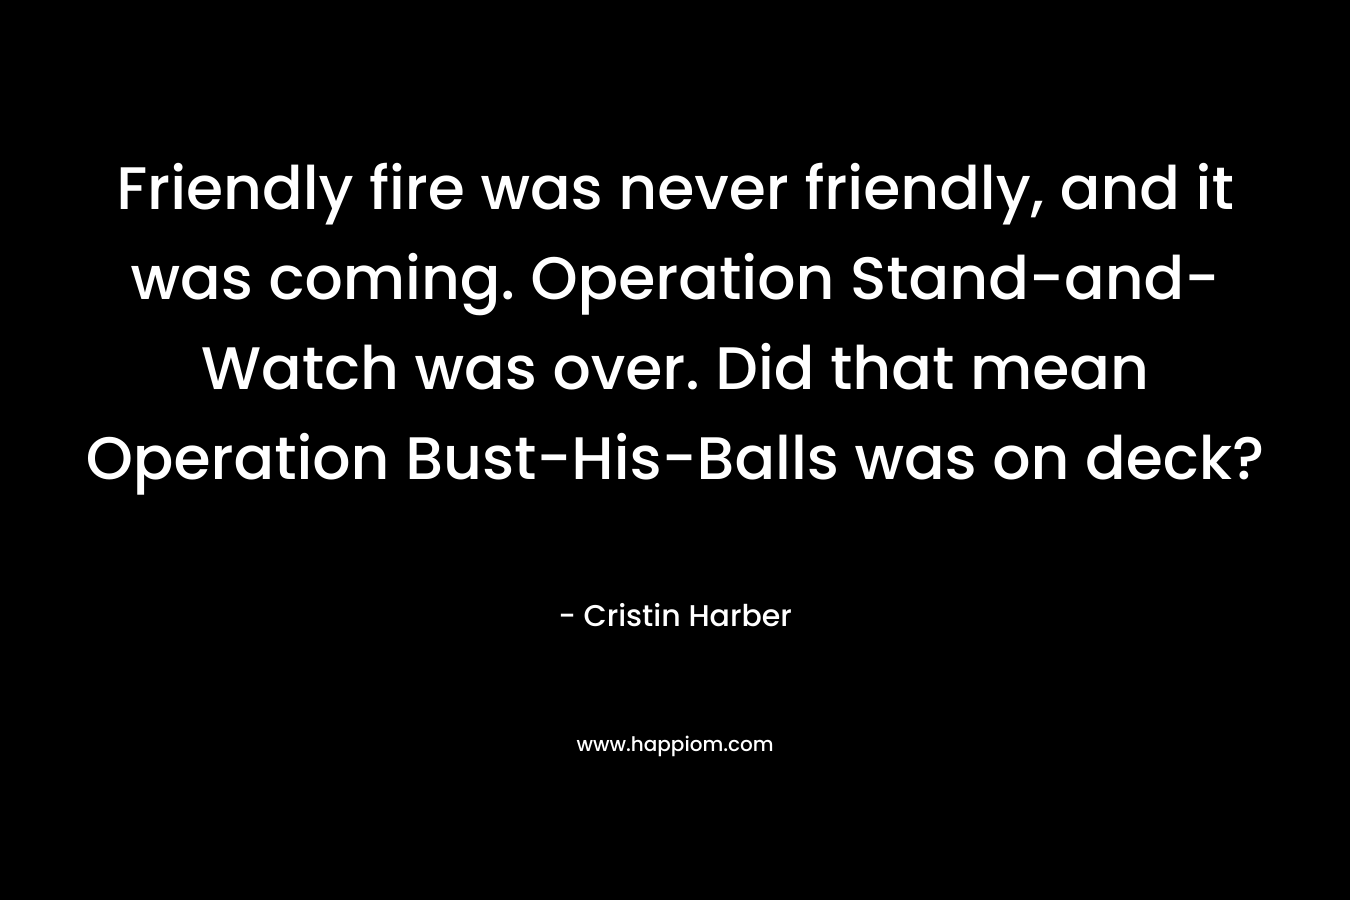 Friendly fire was never friendly, and it was coming. Operation Stand-and-Watch was over. Did that mean Operation Bust-His-Balls was on deck? – Cristin Harber